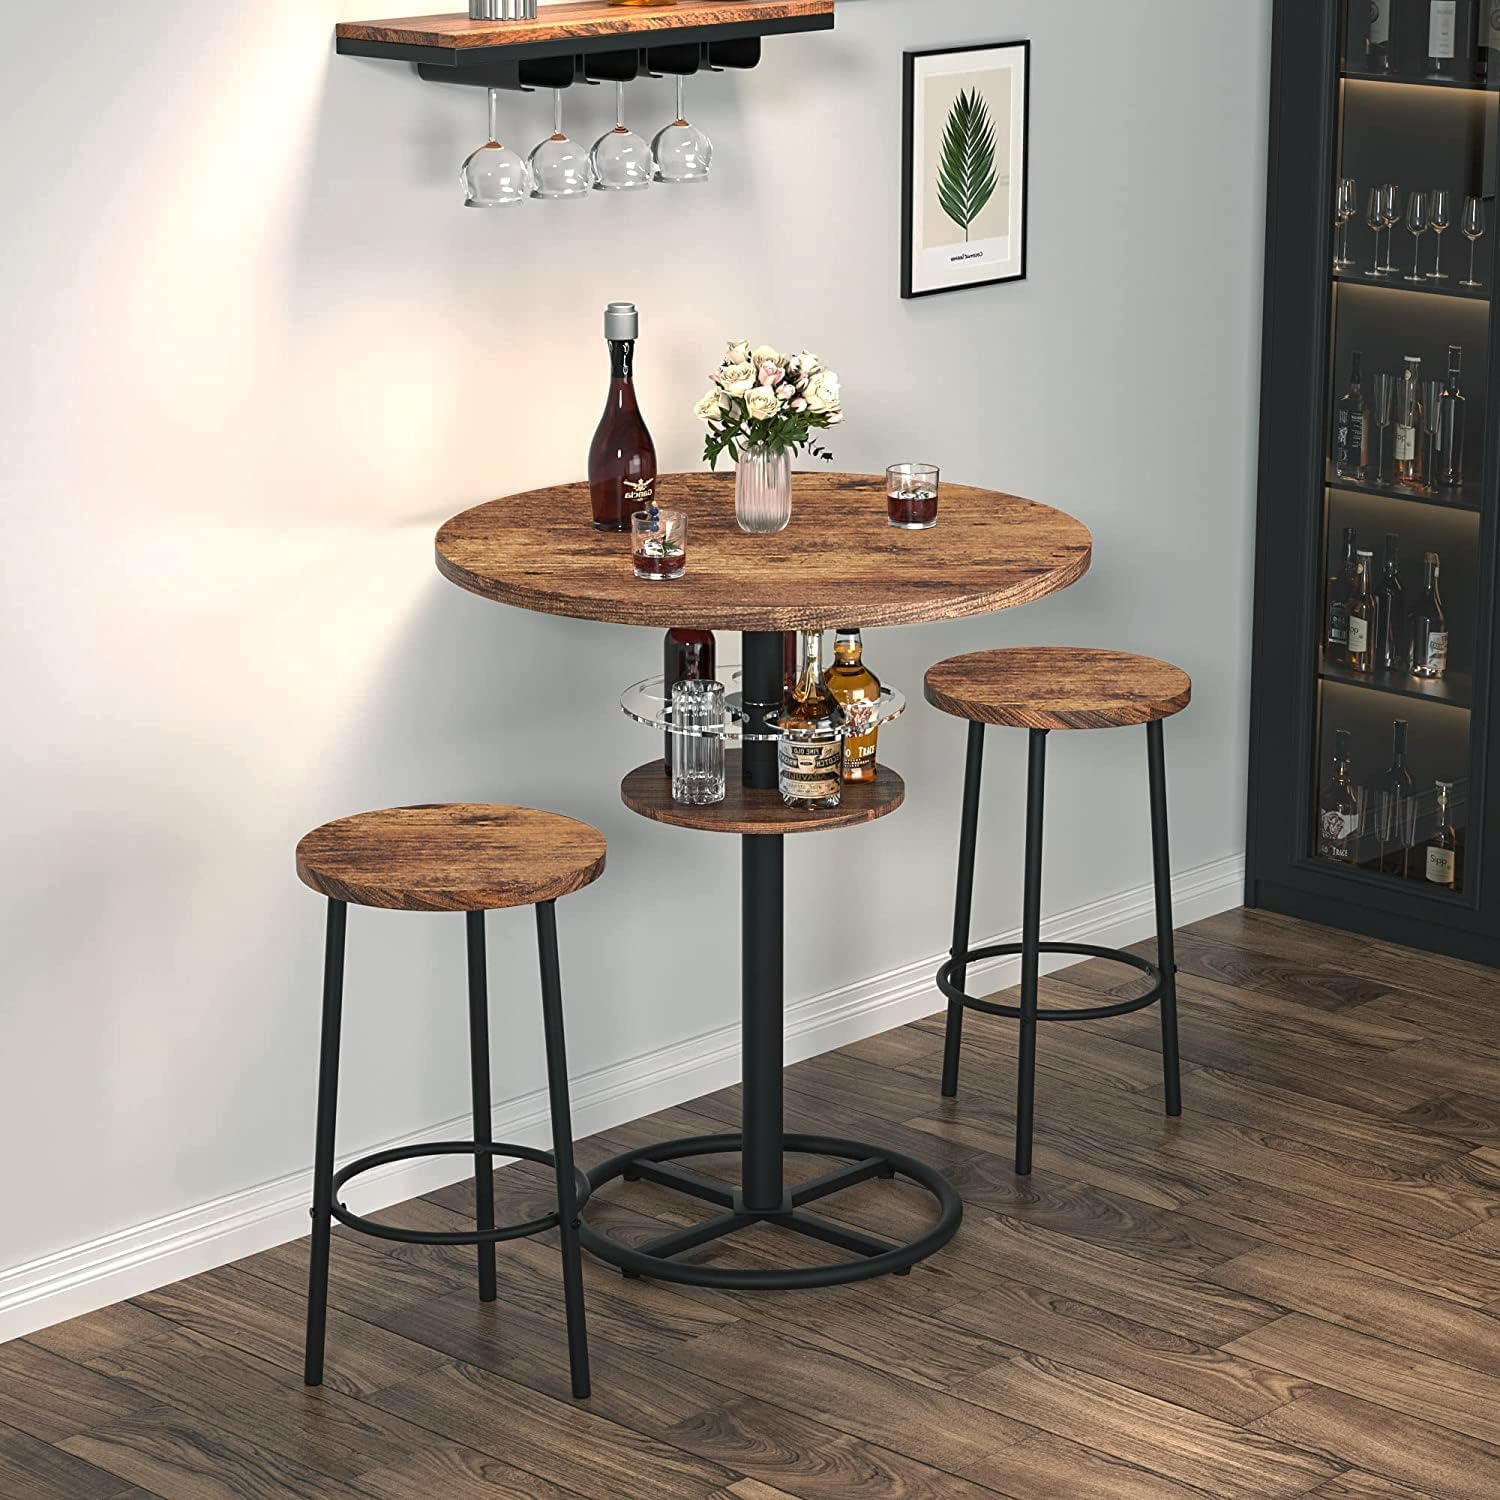 VECELO 3 Piece Bar Dining Set, Small 2-Tier Round Pub Table with Barstools